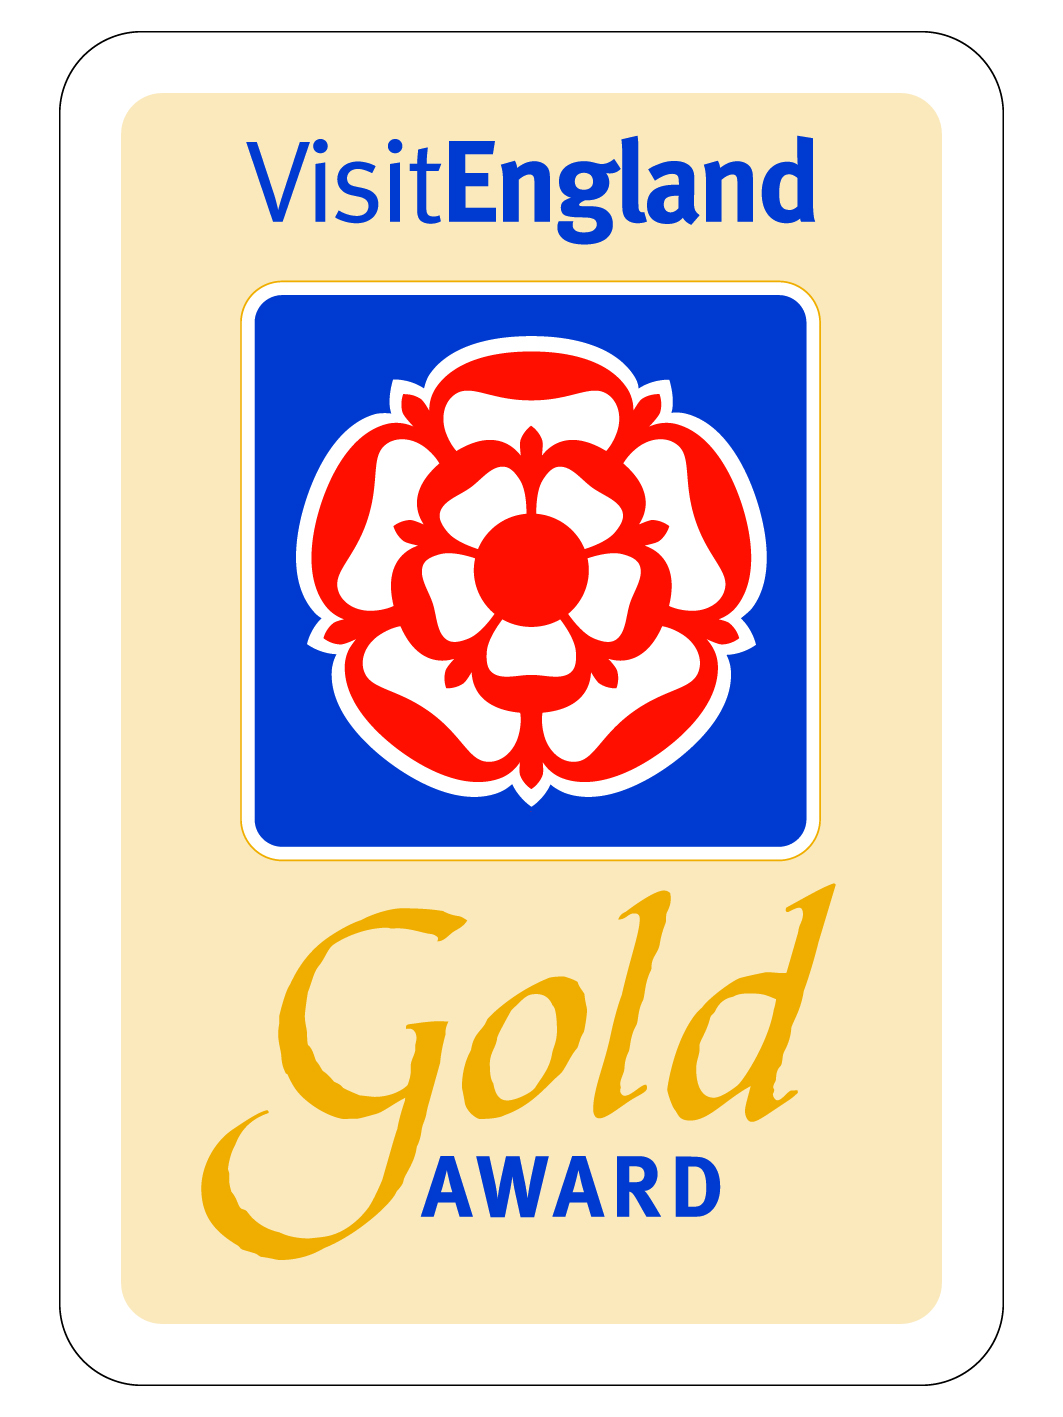 Visit England awarded five star gold cottages in Cornwall